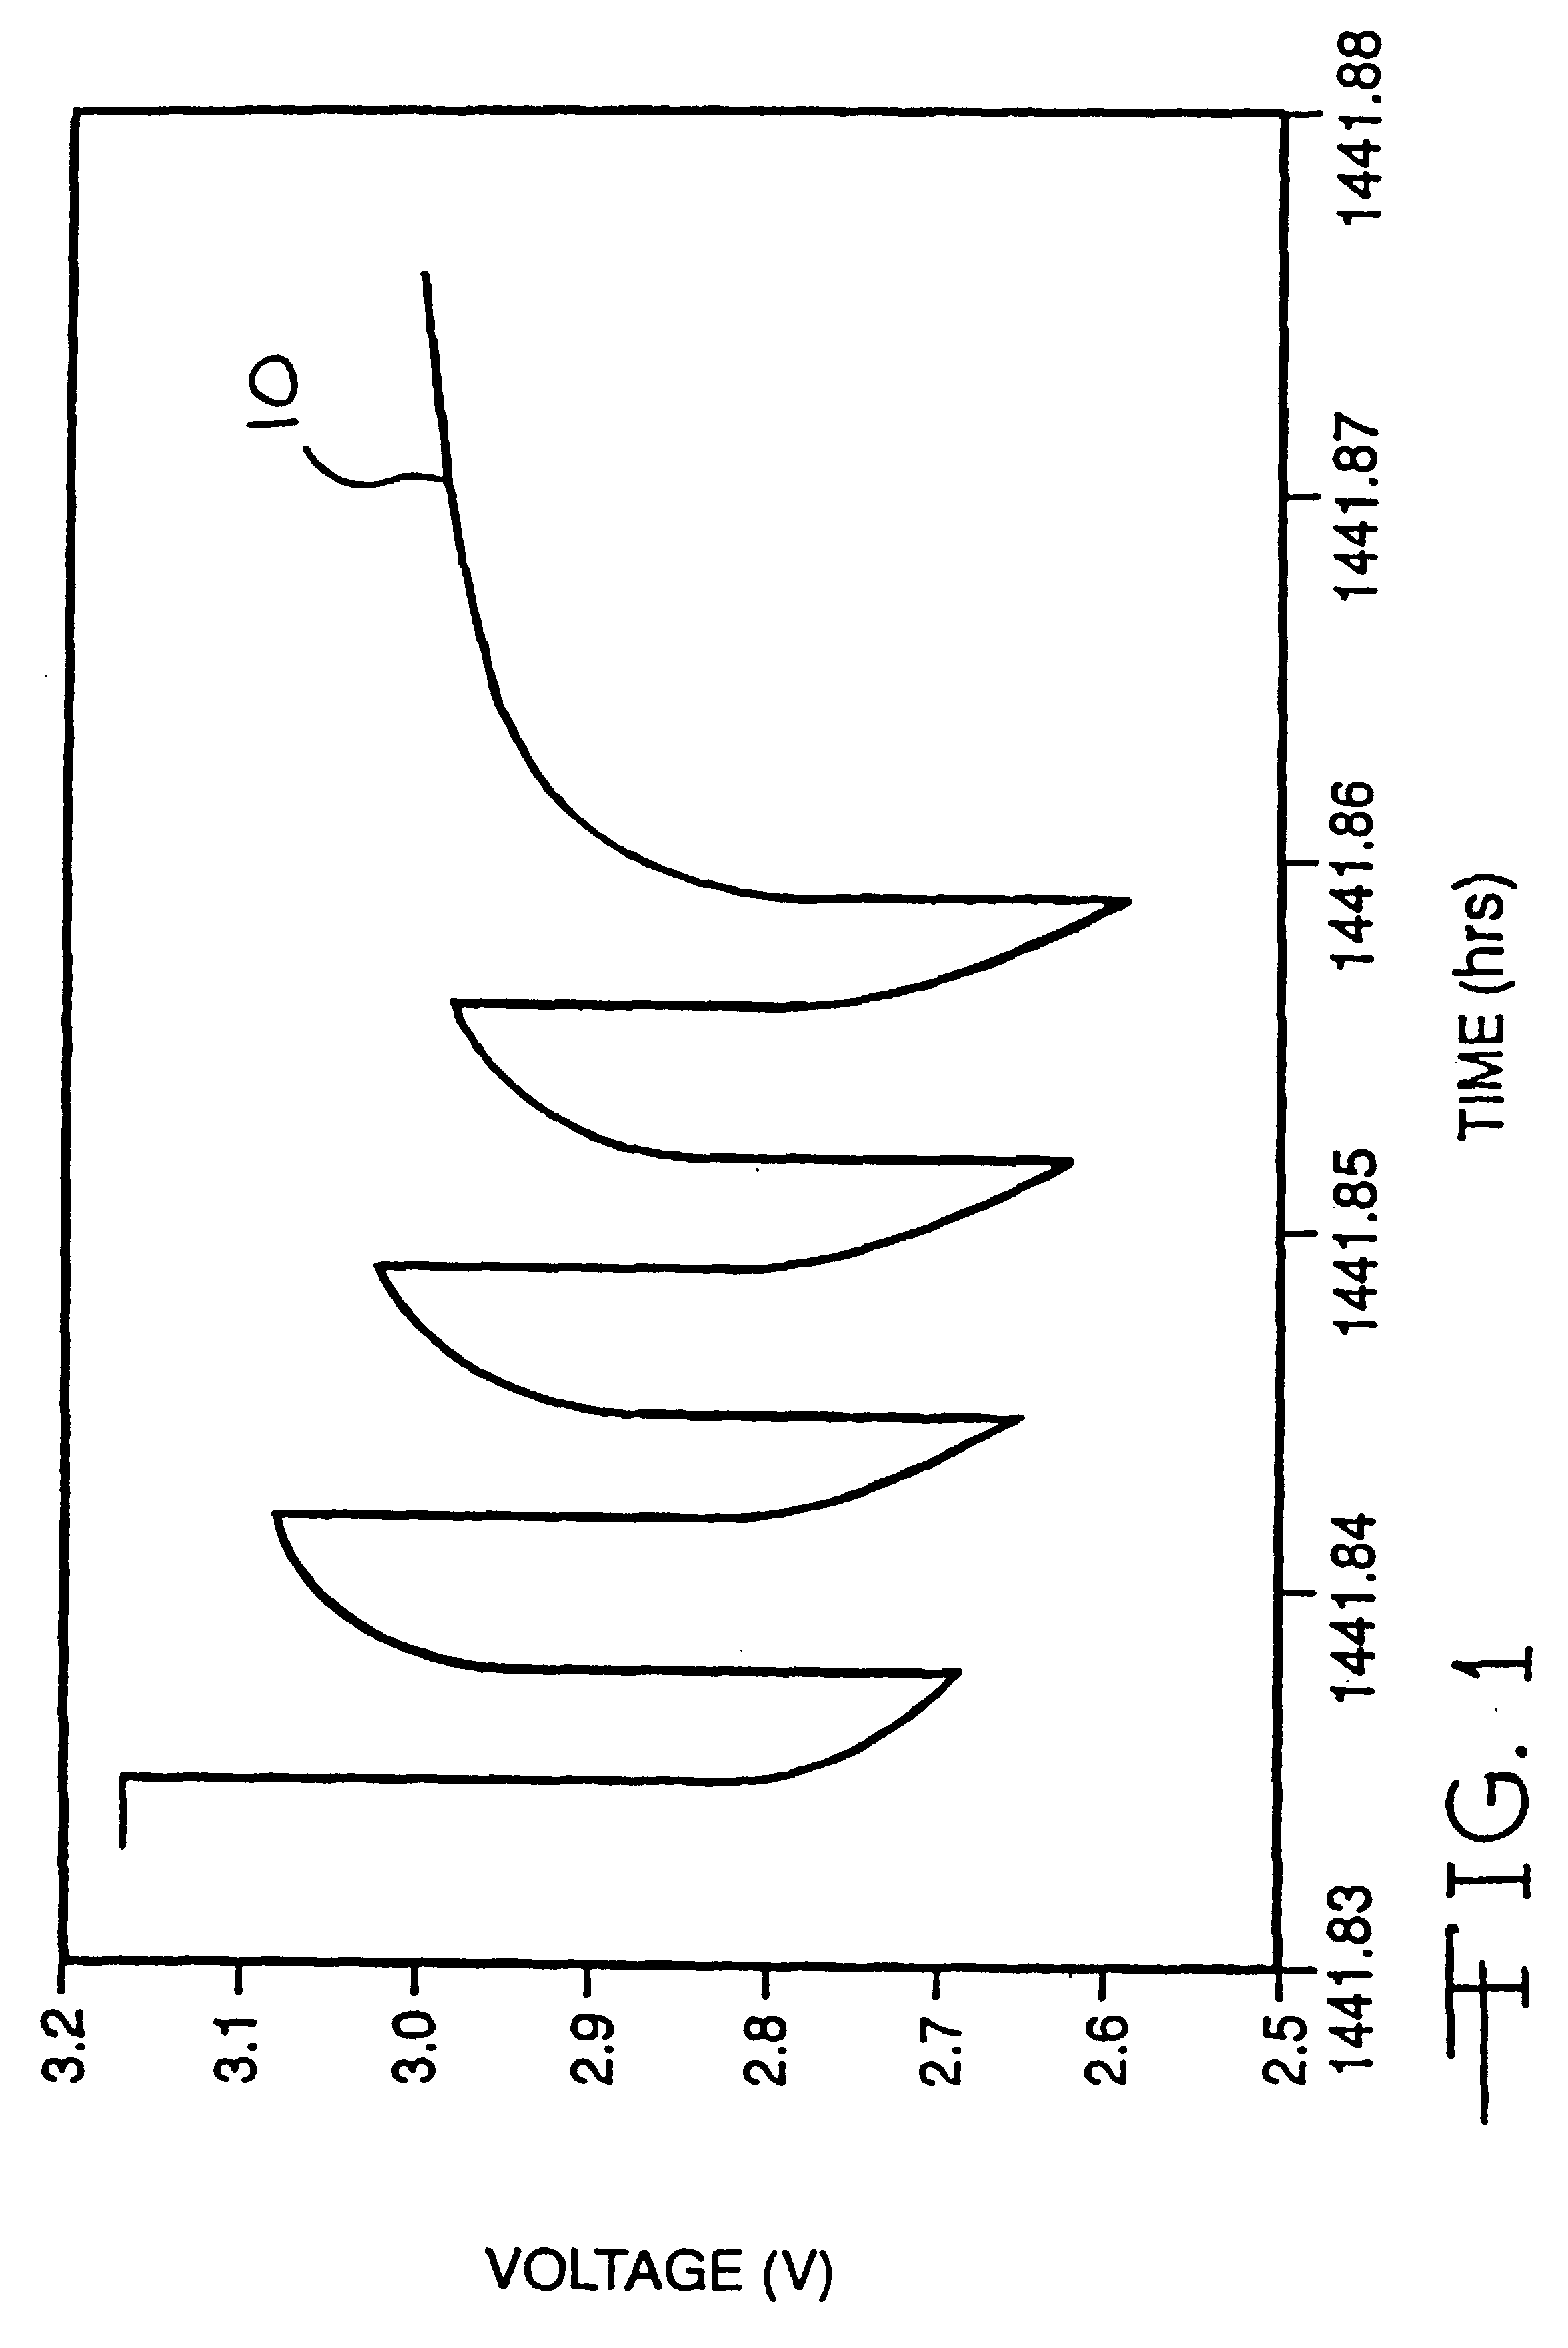 Method for reducing voltage delay in an alkali metal electrochemical cell activated with a nonaqueous electrolyte having a sulfate additive